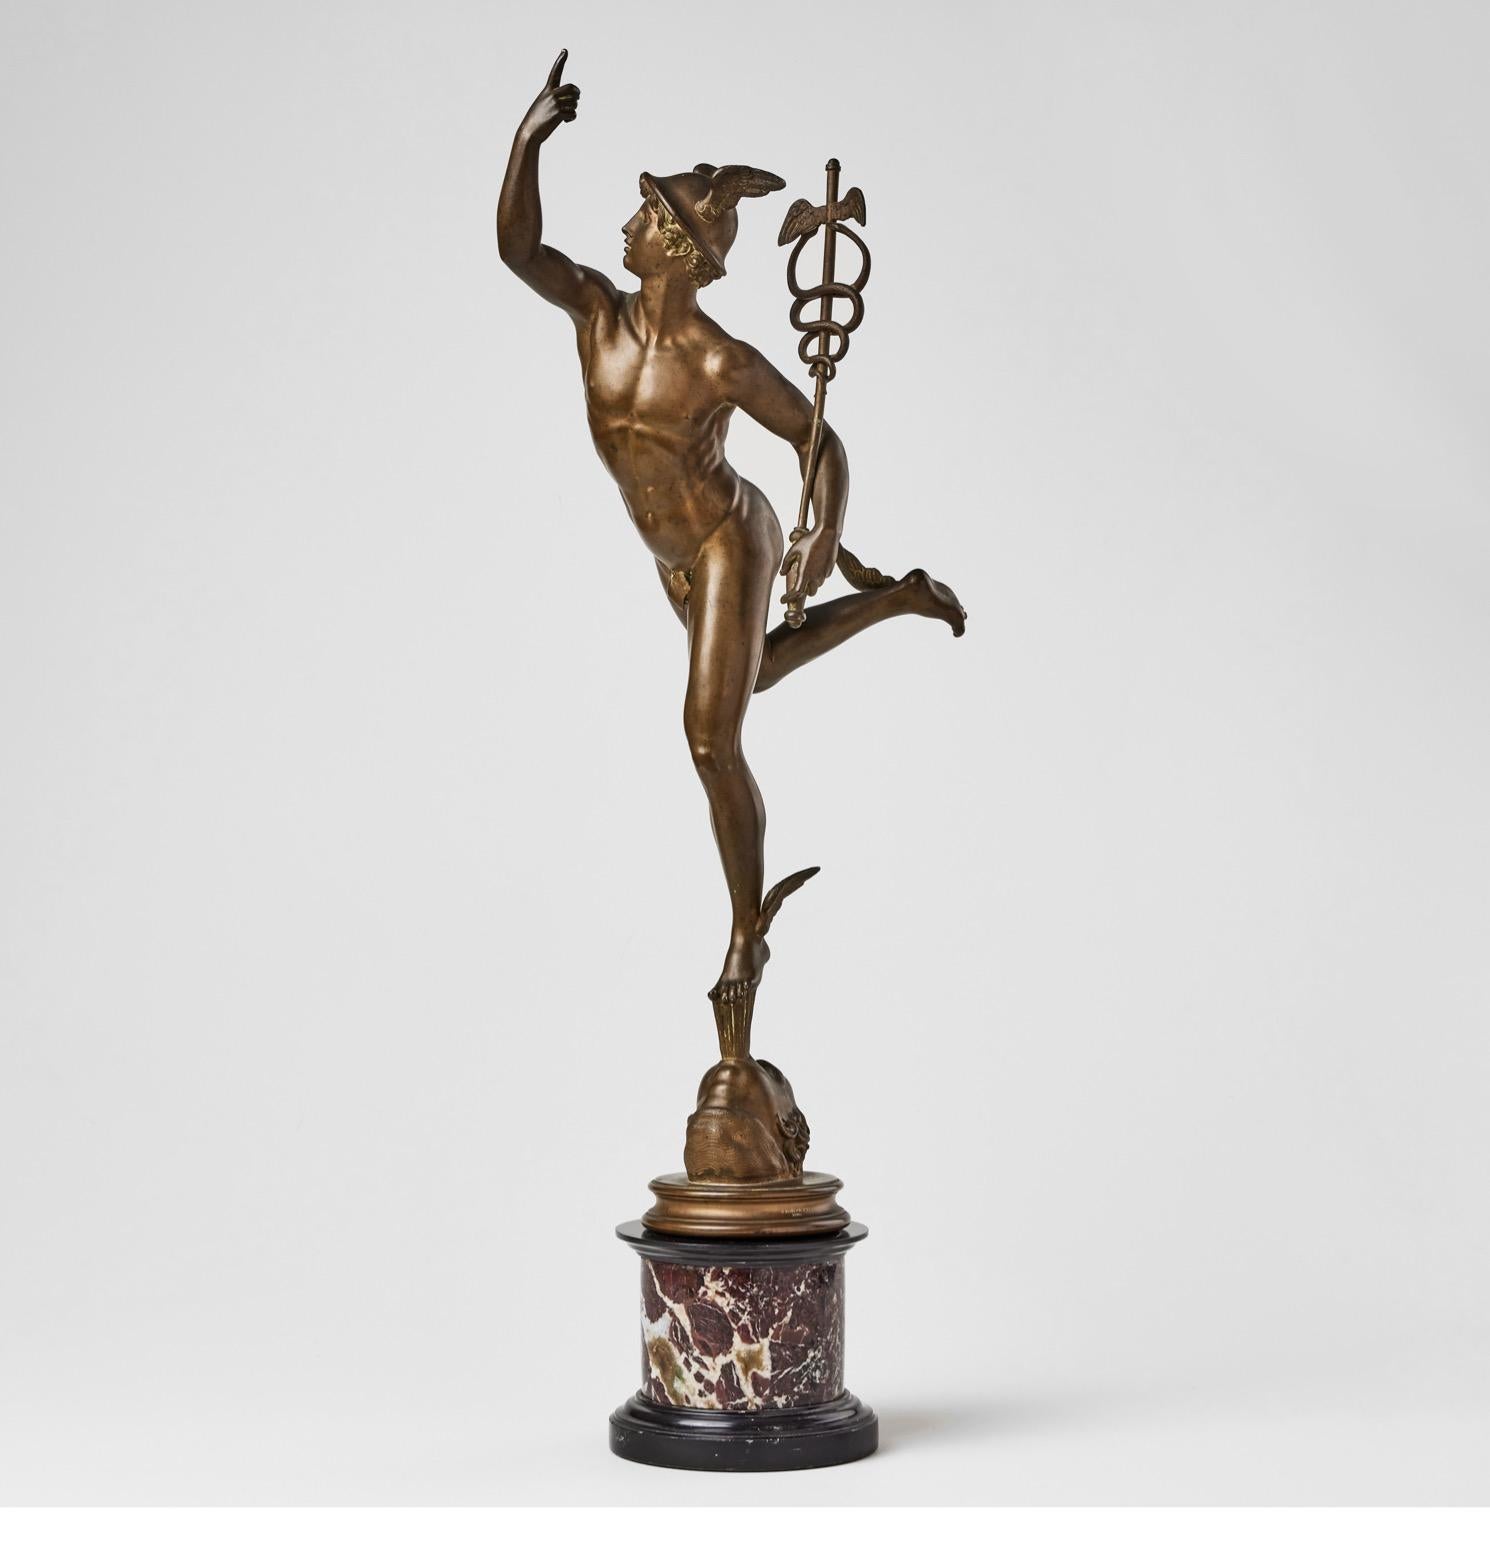 A very fine 19th century signed Grand Tour bronze sculpture of Mercury, also called Mercurius, by the Benedetto Boschetti workshops. On a red and black marble base. The model of Mercury is after the celebrated sculptor Giambologna (1529-1608), also